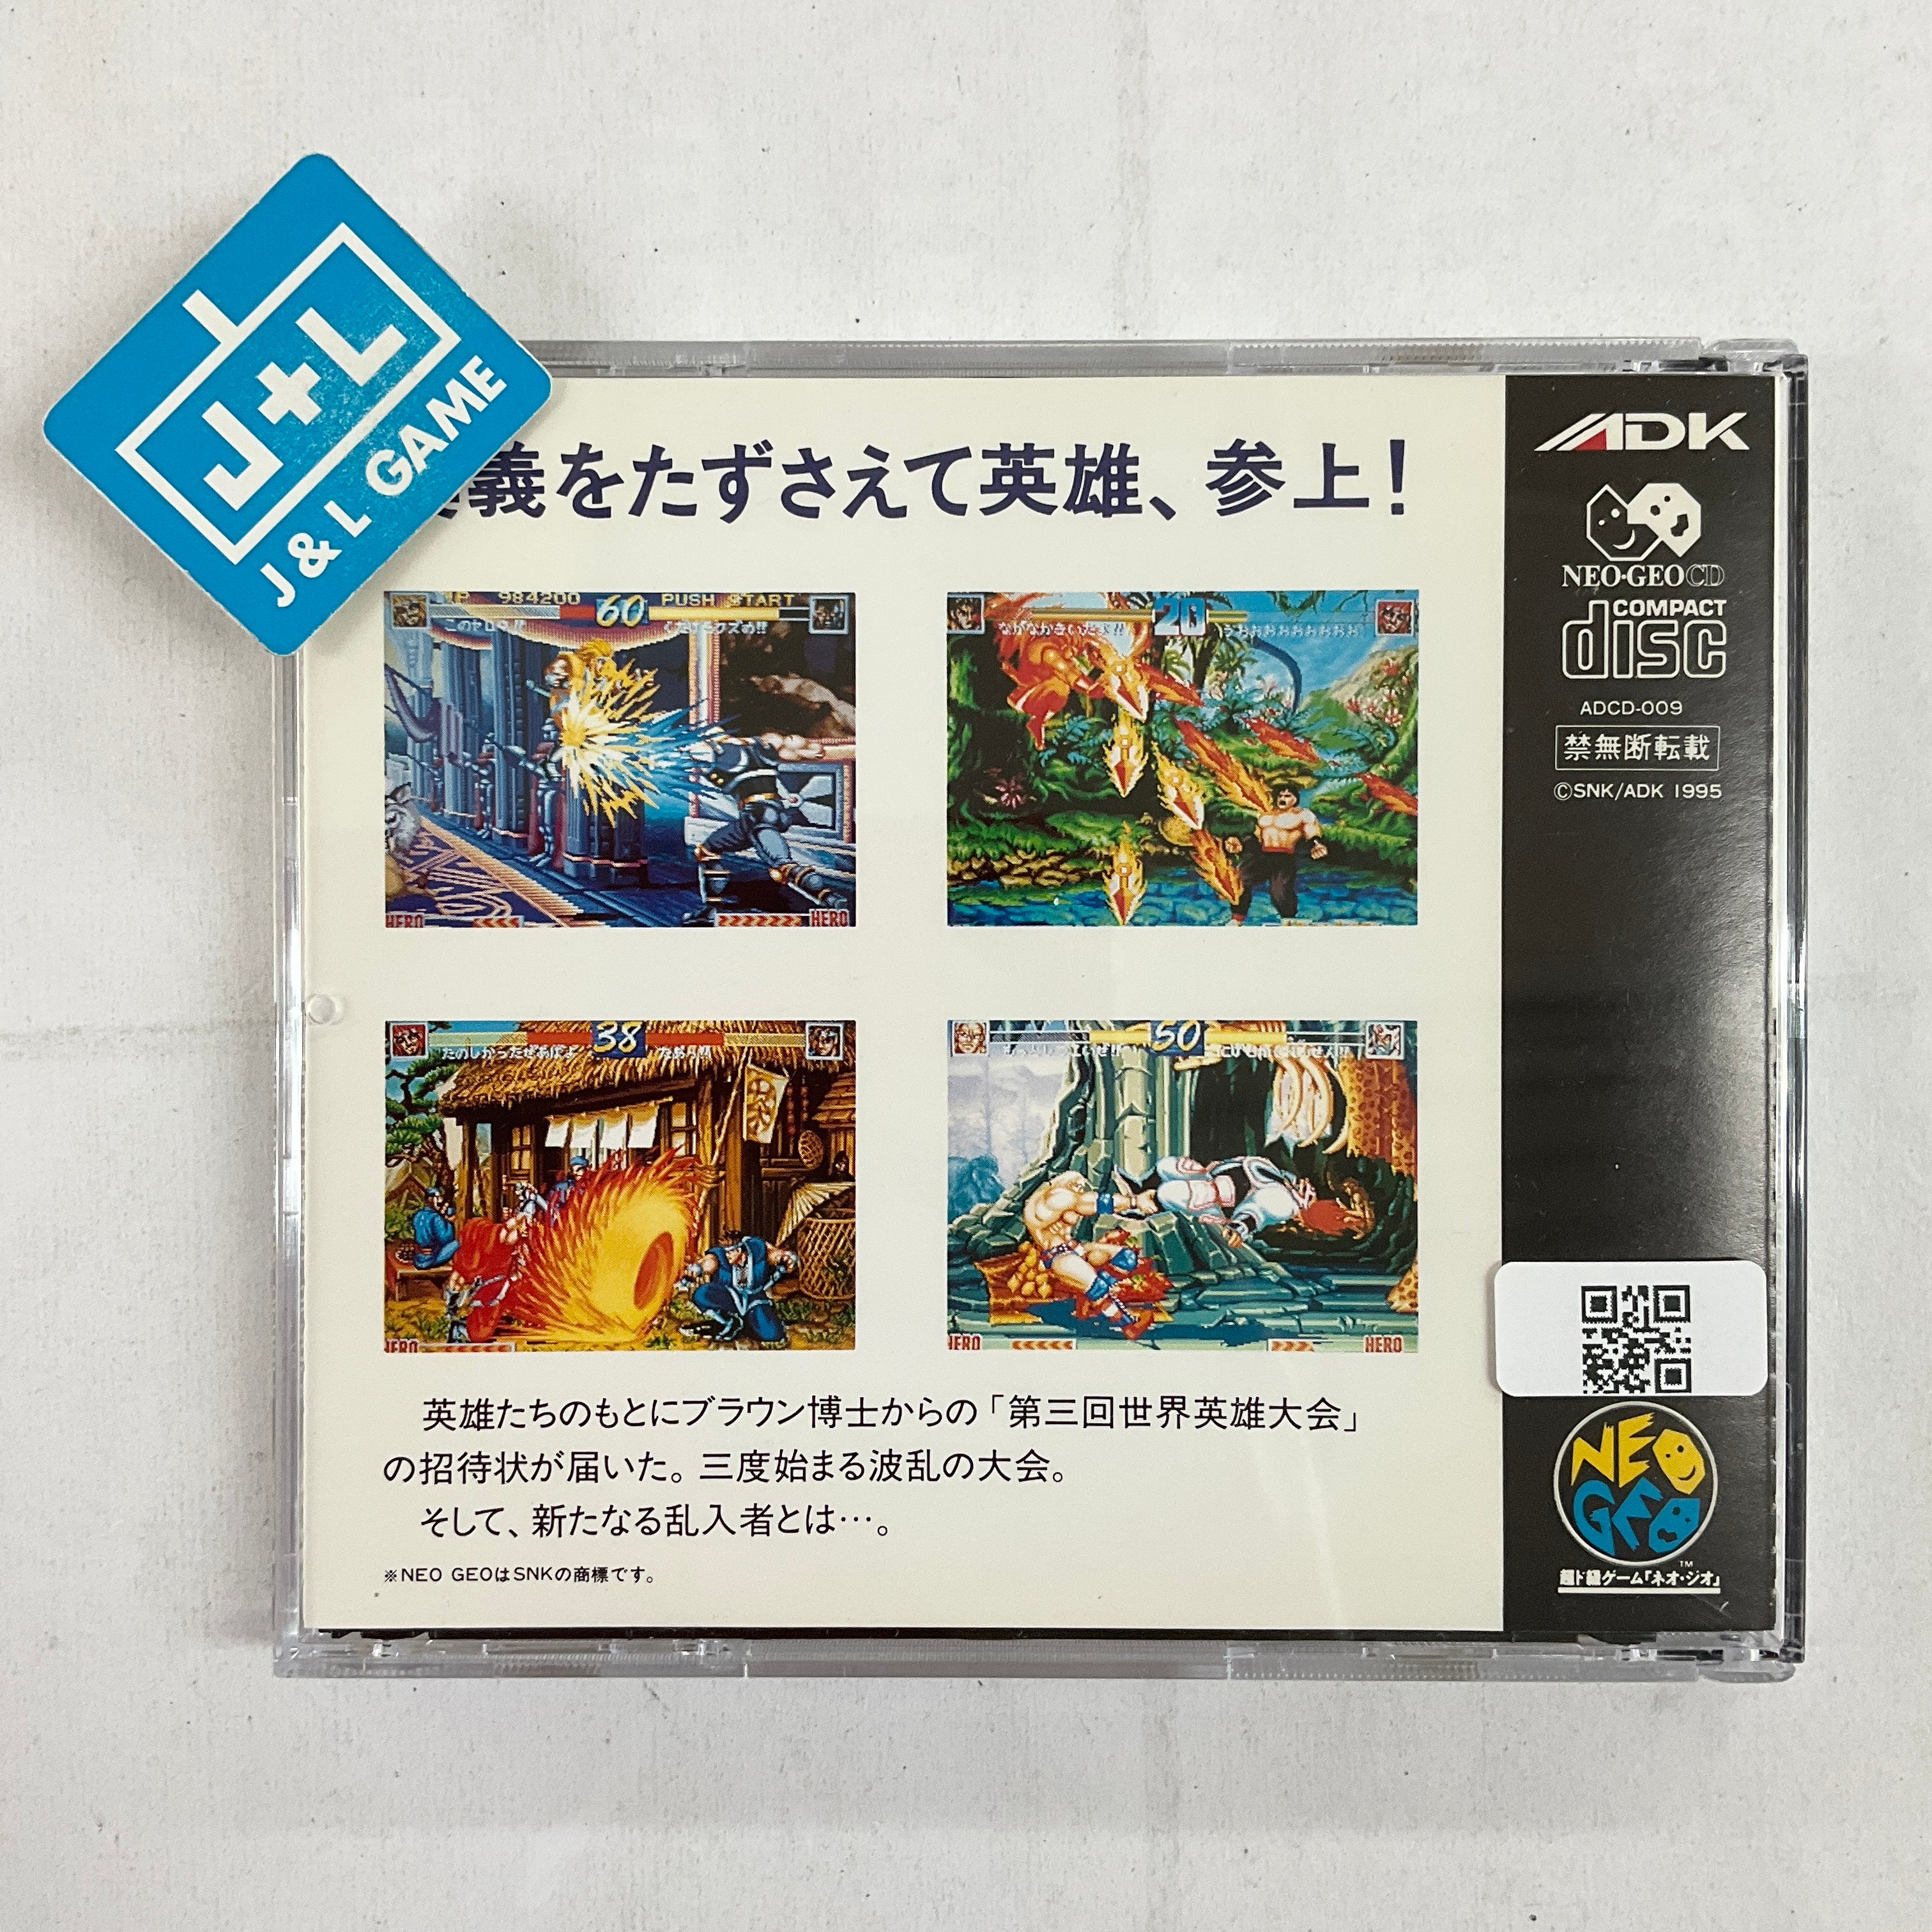 World Heroes Perfect - (NGCD) Neo Geo CD [Pre-Owned] (Japanese Import) Video Games ADK   